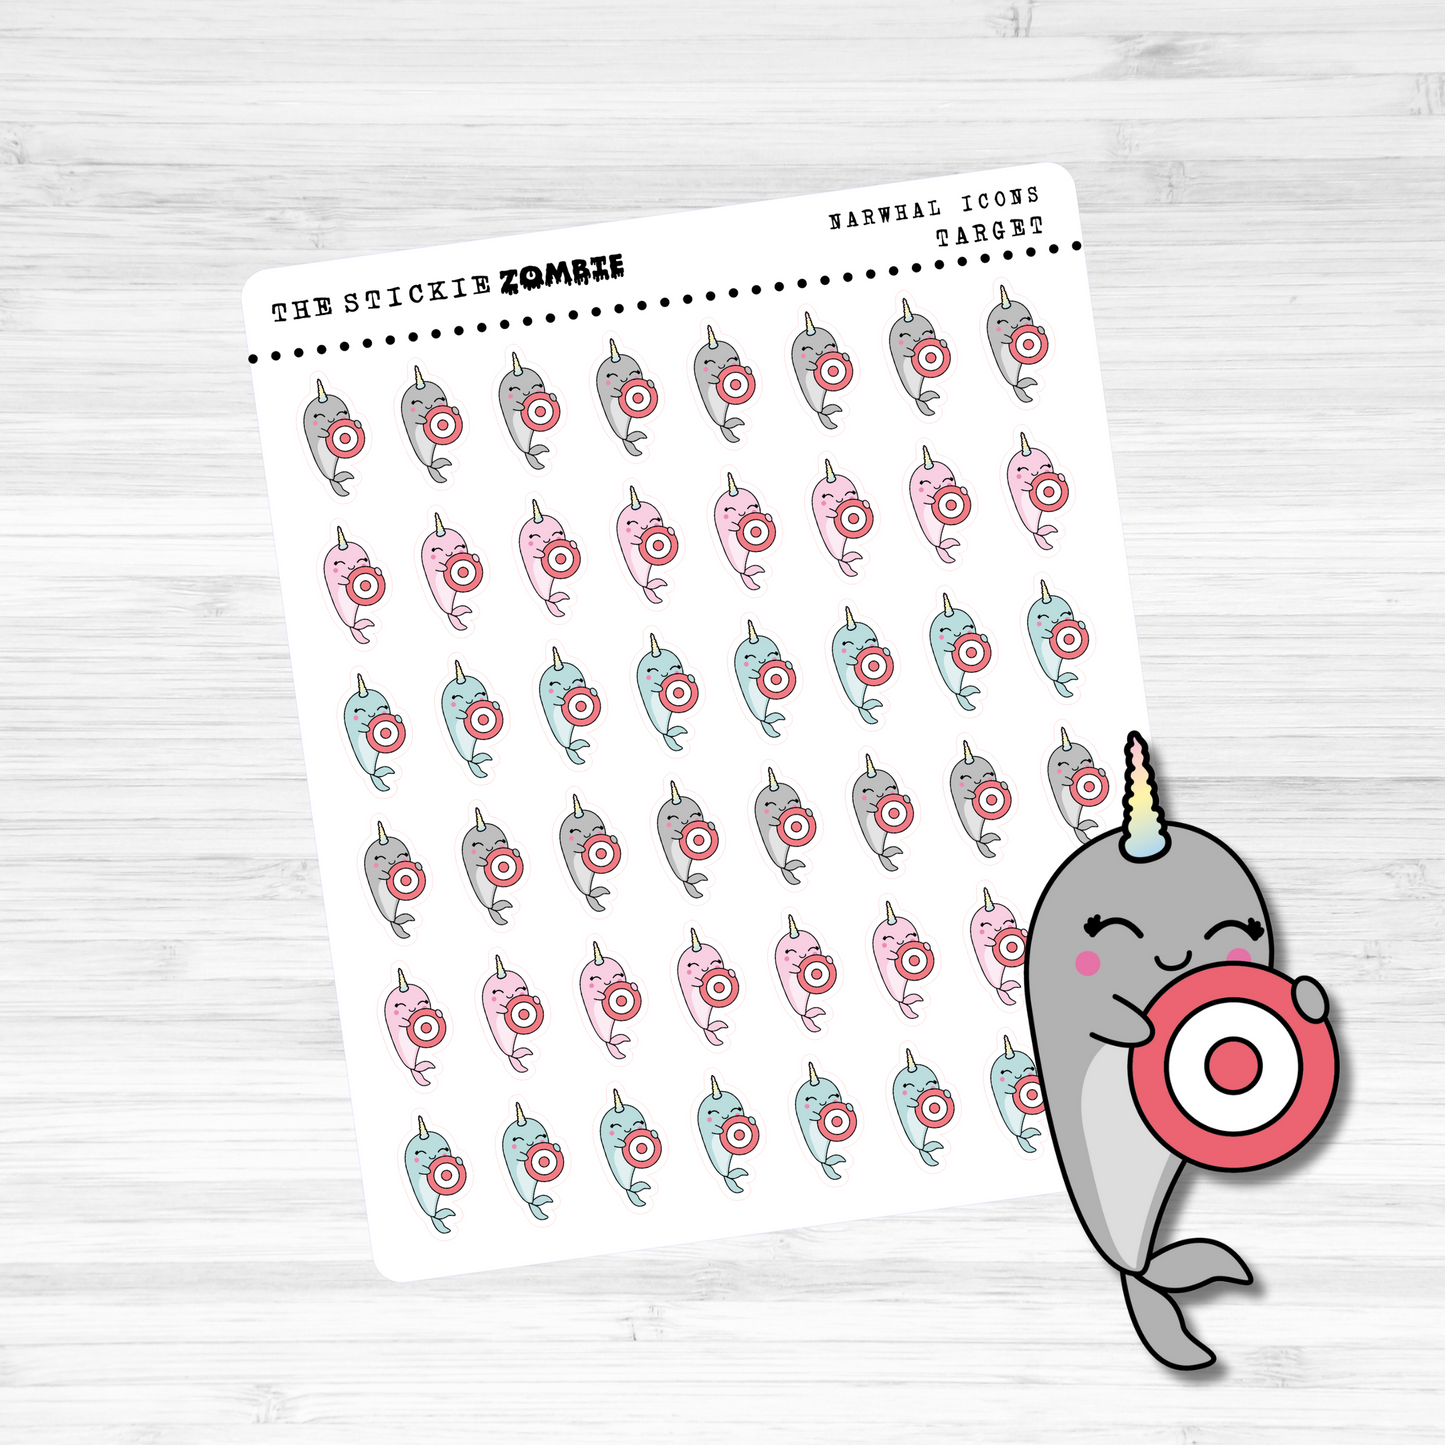 Icons / Narwhal / Target